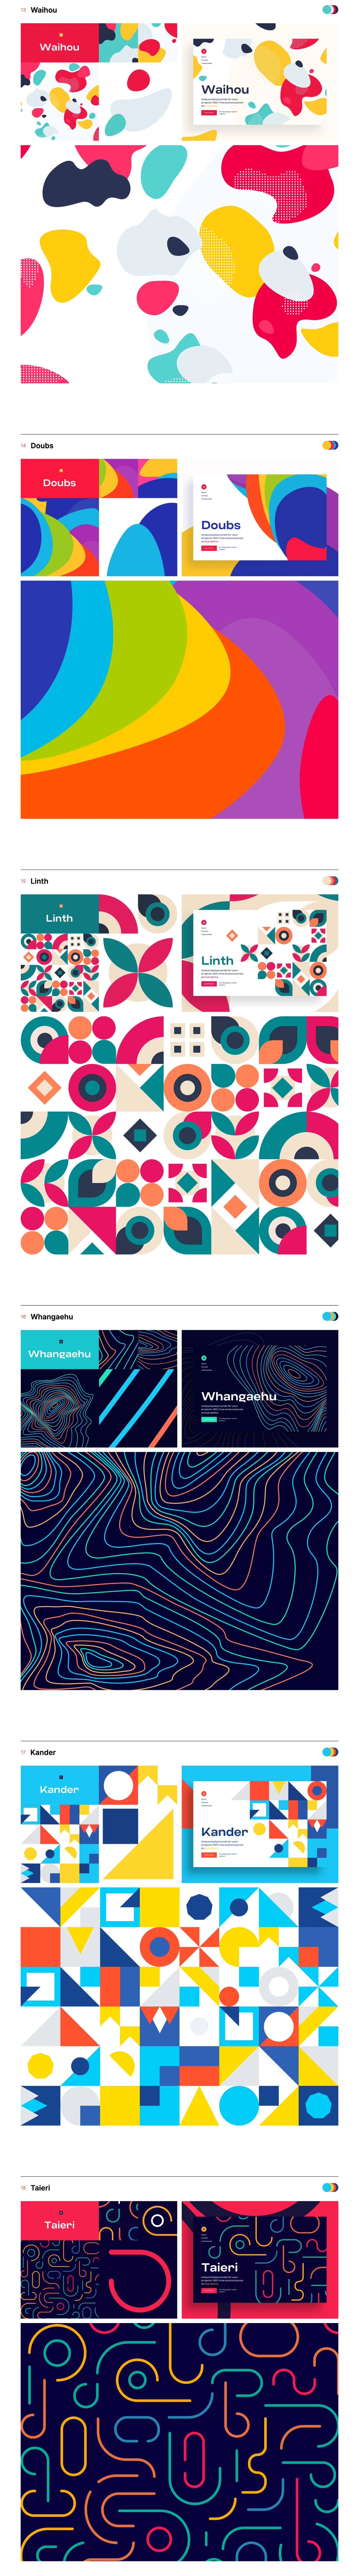 Paaatterns - Free handcrafted patterns - Free collection of beautiful patterns for all vector formats. Handcrafted patterns for your commercial and personal projects. For Sketch, Figma, XD, Illustrator. In png and svg